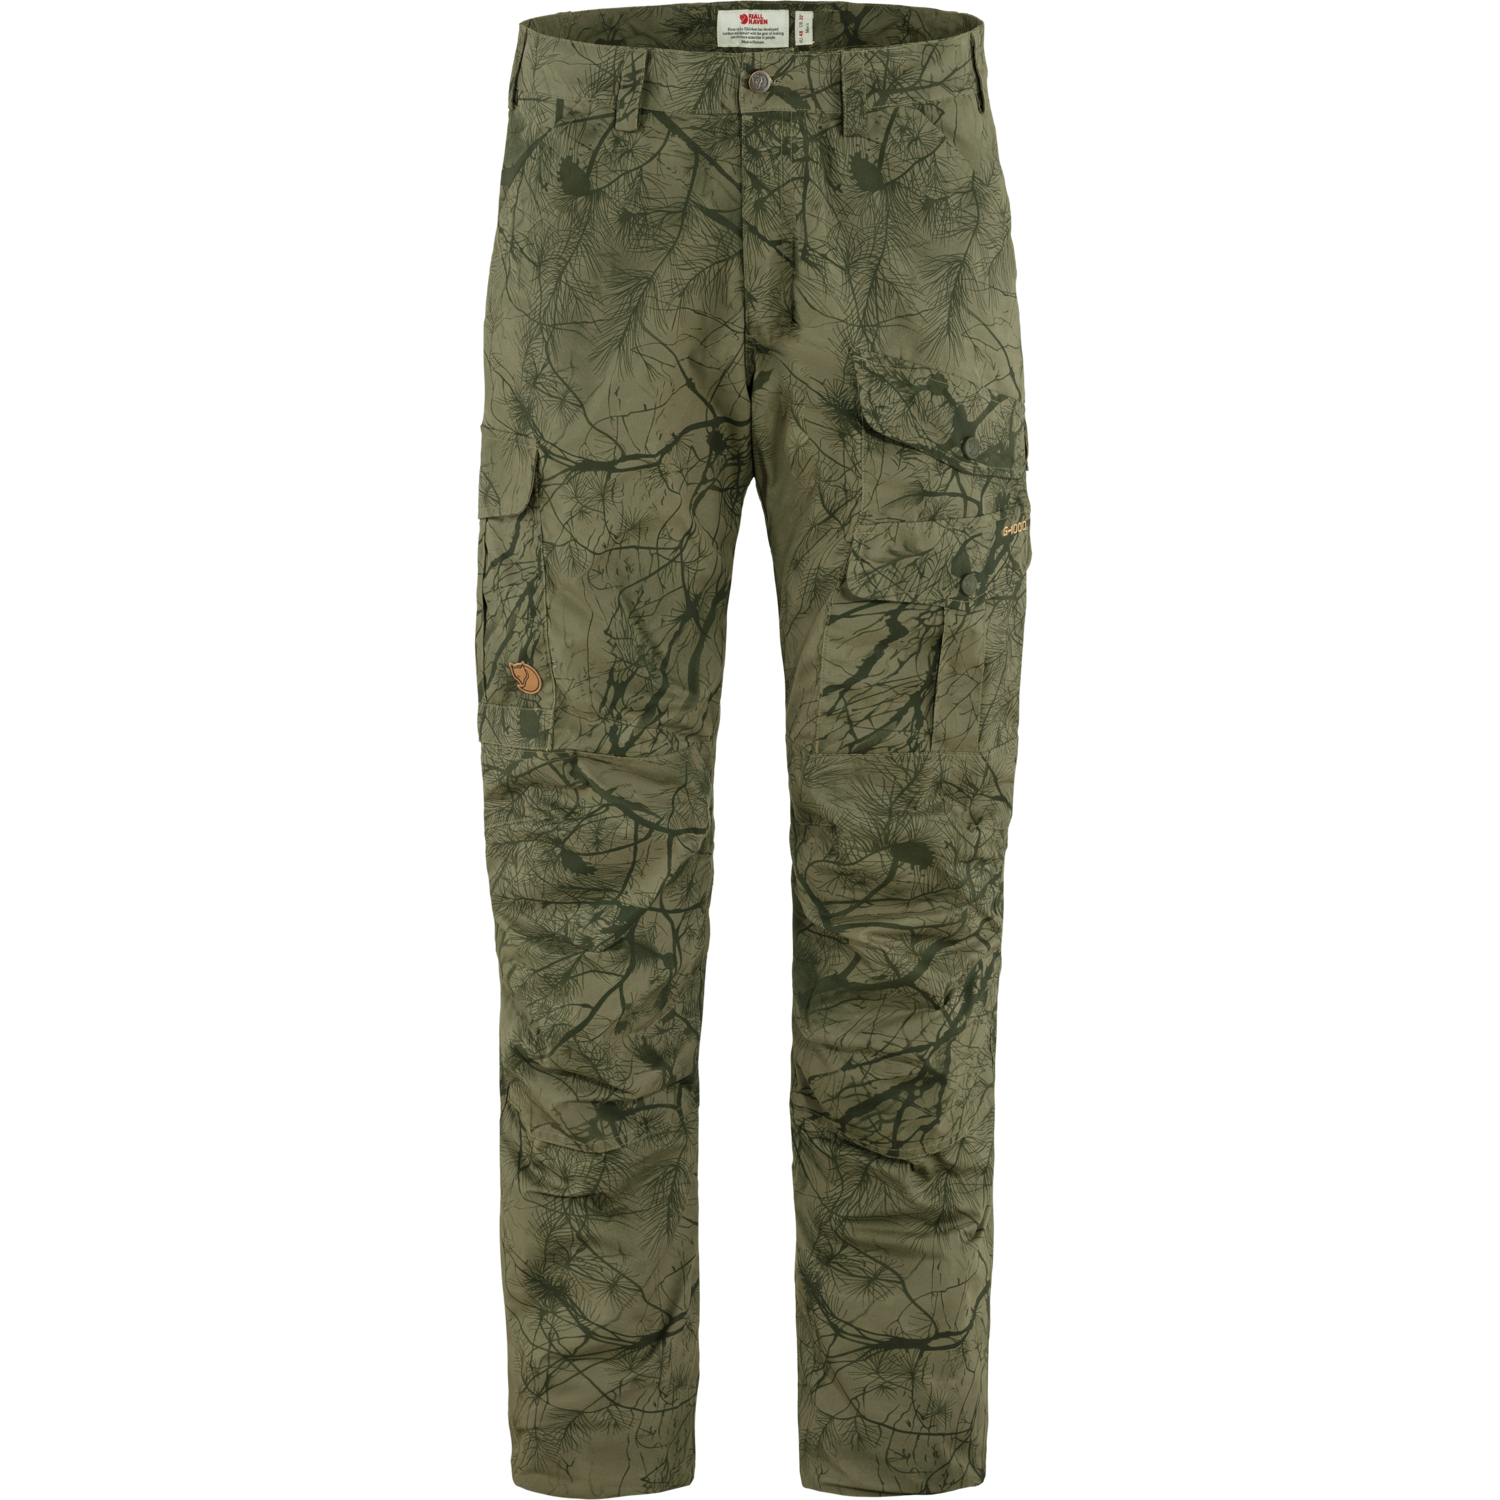 Fjäll Räven Mens Outdoor pants Barents Pro Hydratic (camou) at low